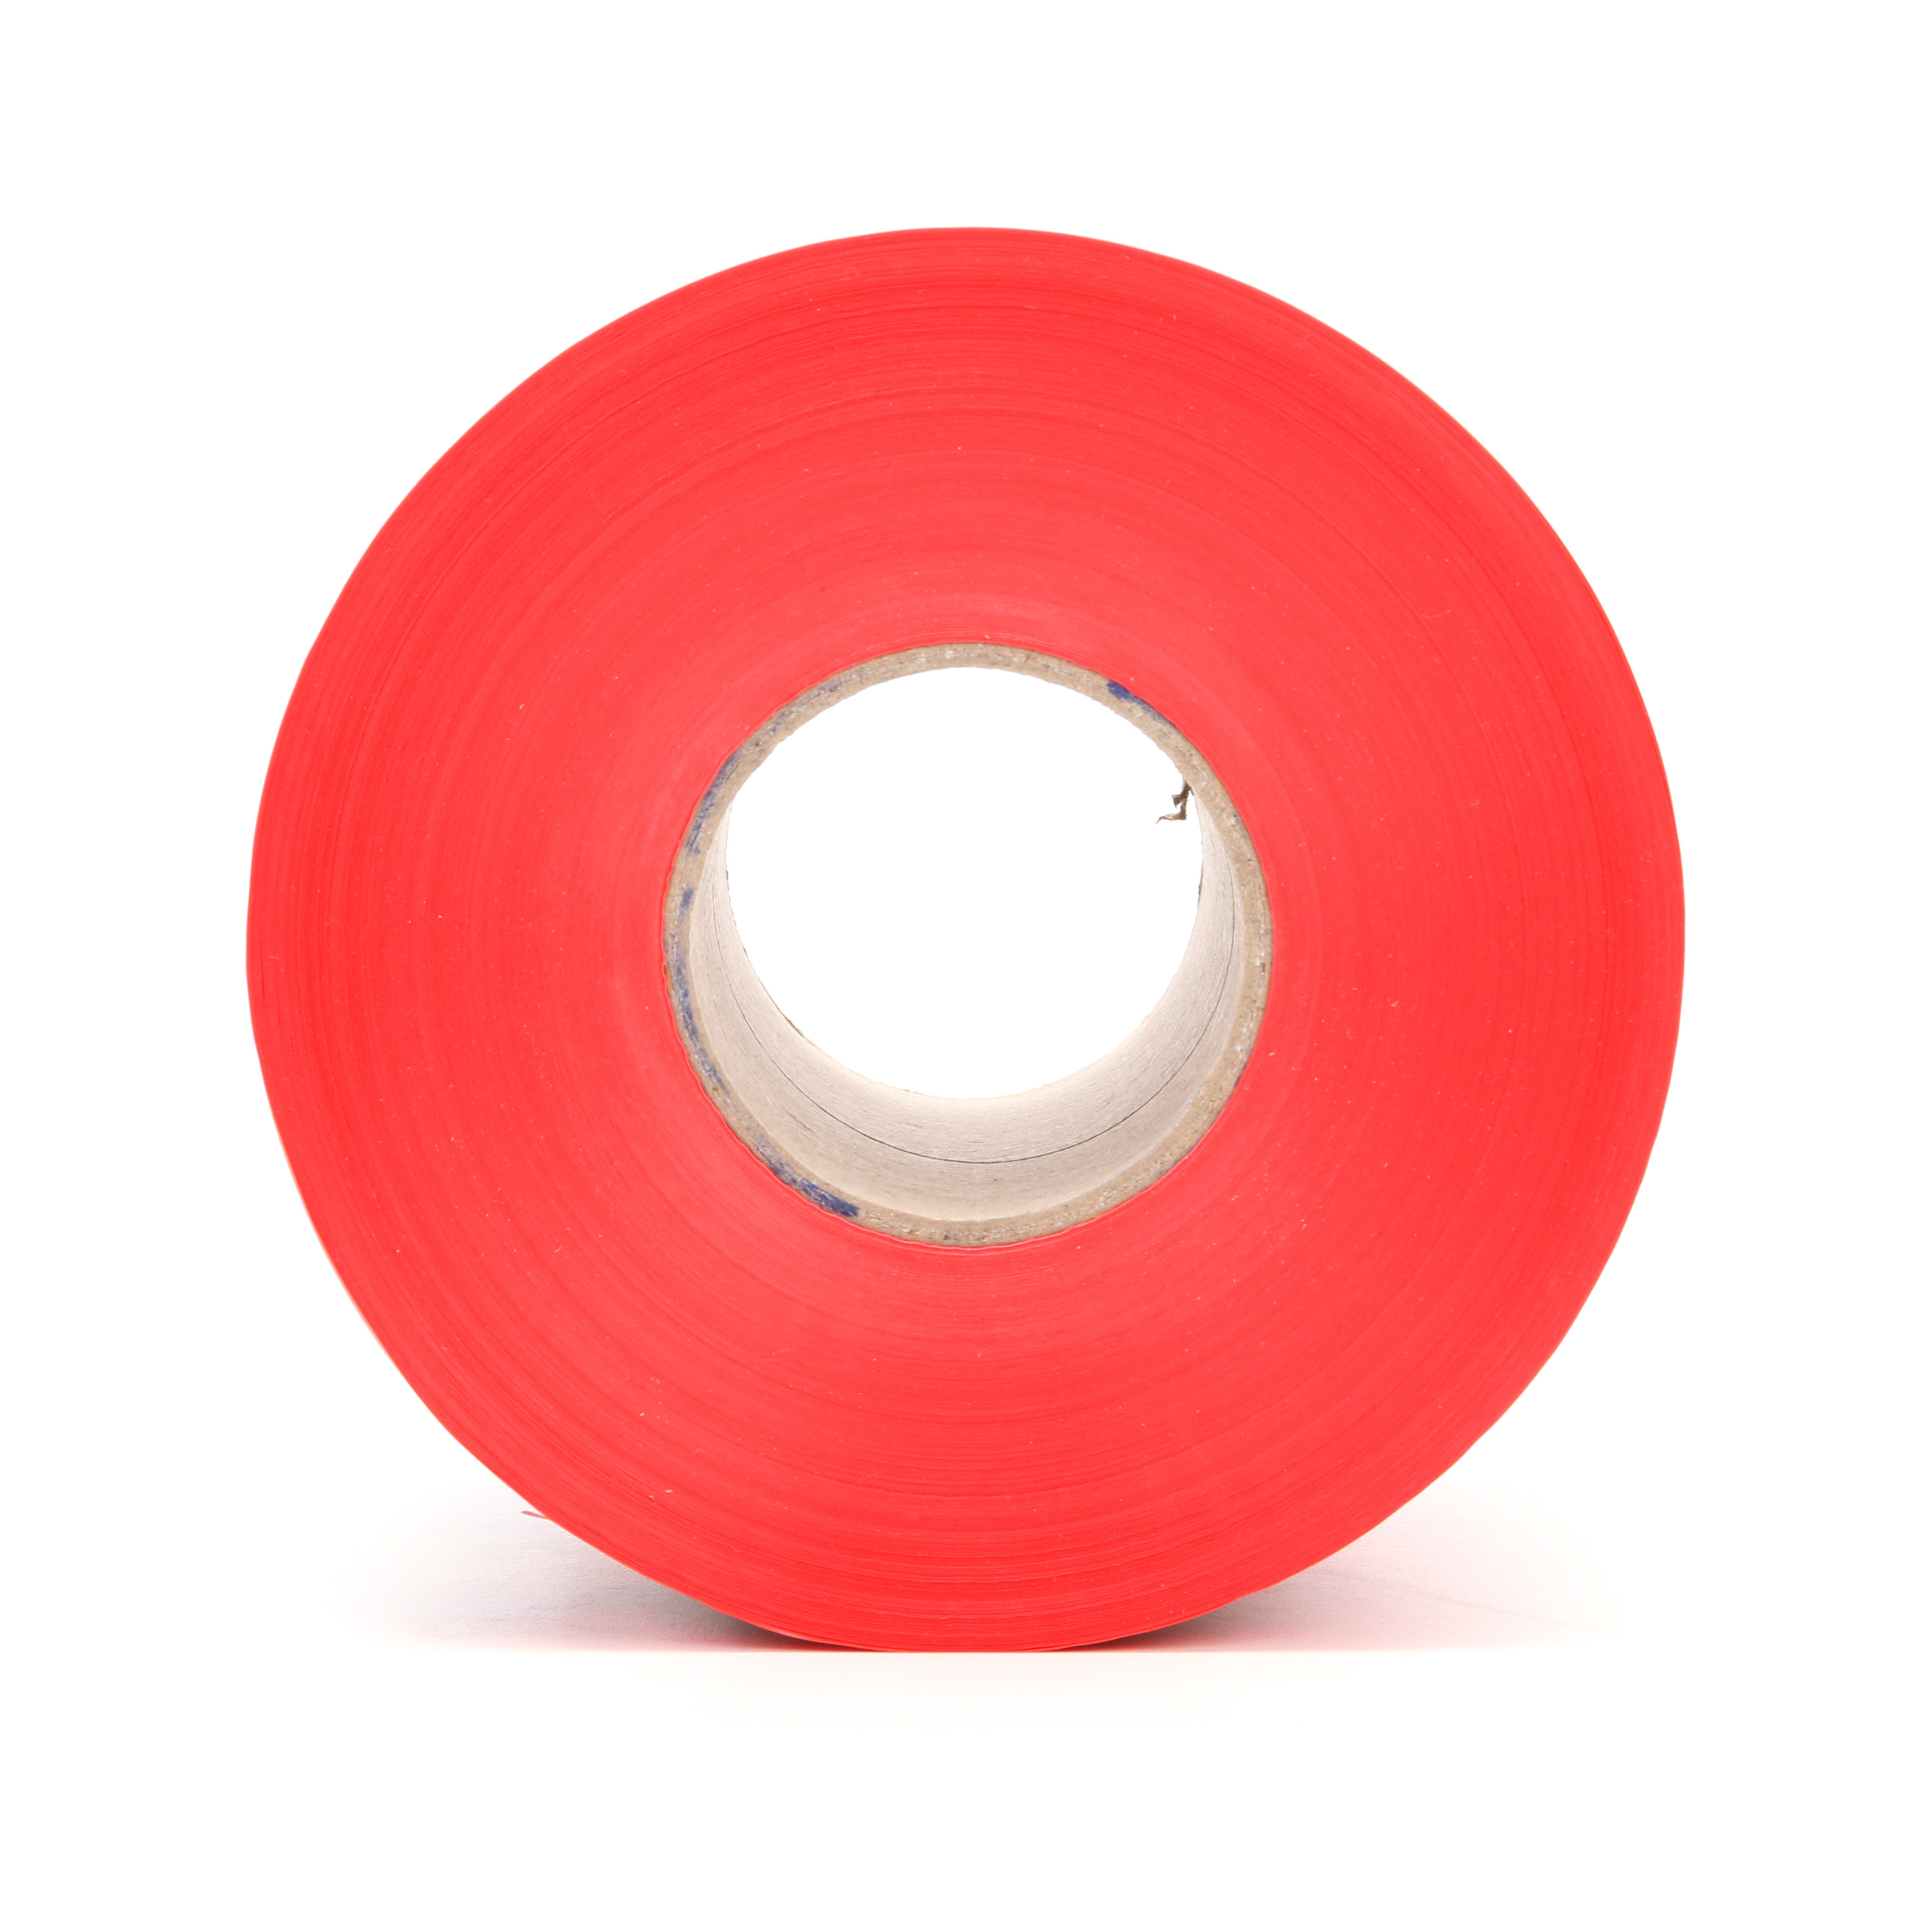 Scotch® Buried Barricade Tape 368, CAUTION BURIED ELECTRIC LINE BELOW, 6
in x 1000 ft, Red, 4 rolls/Case